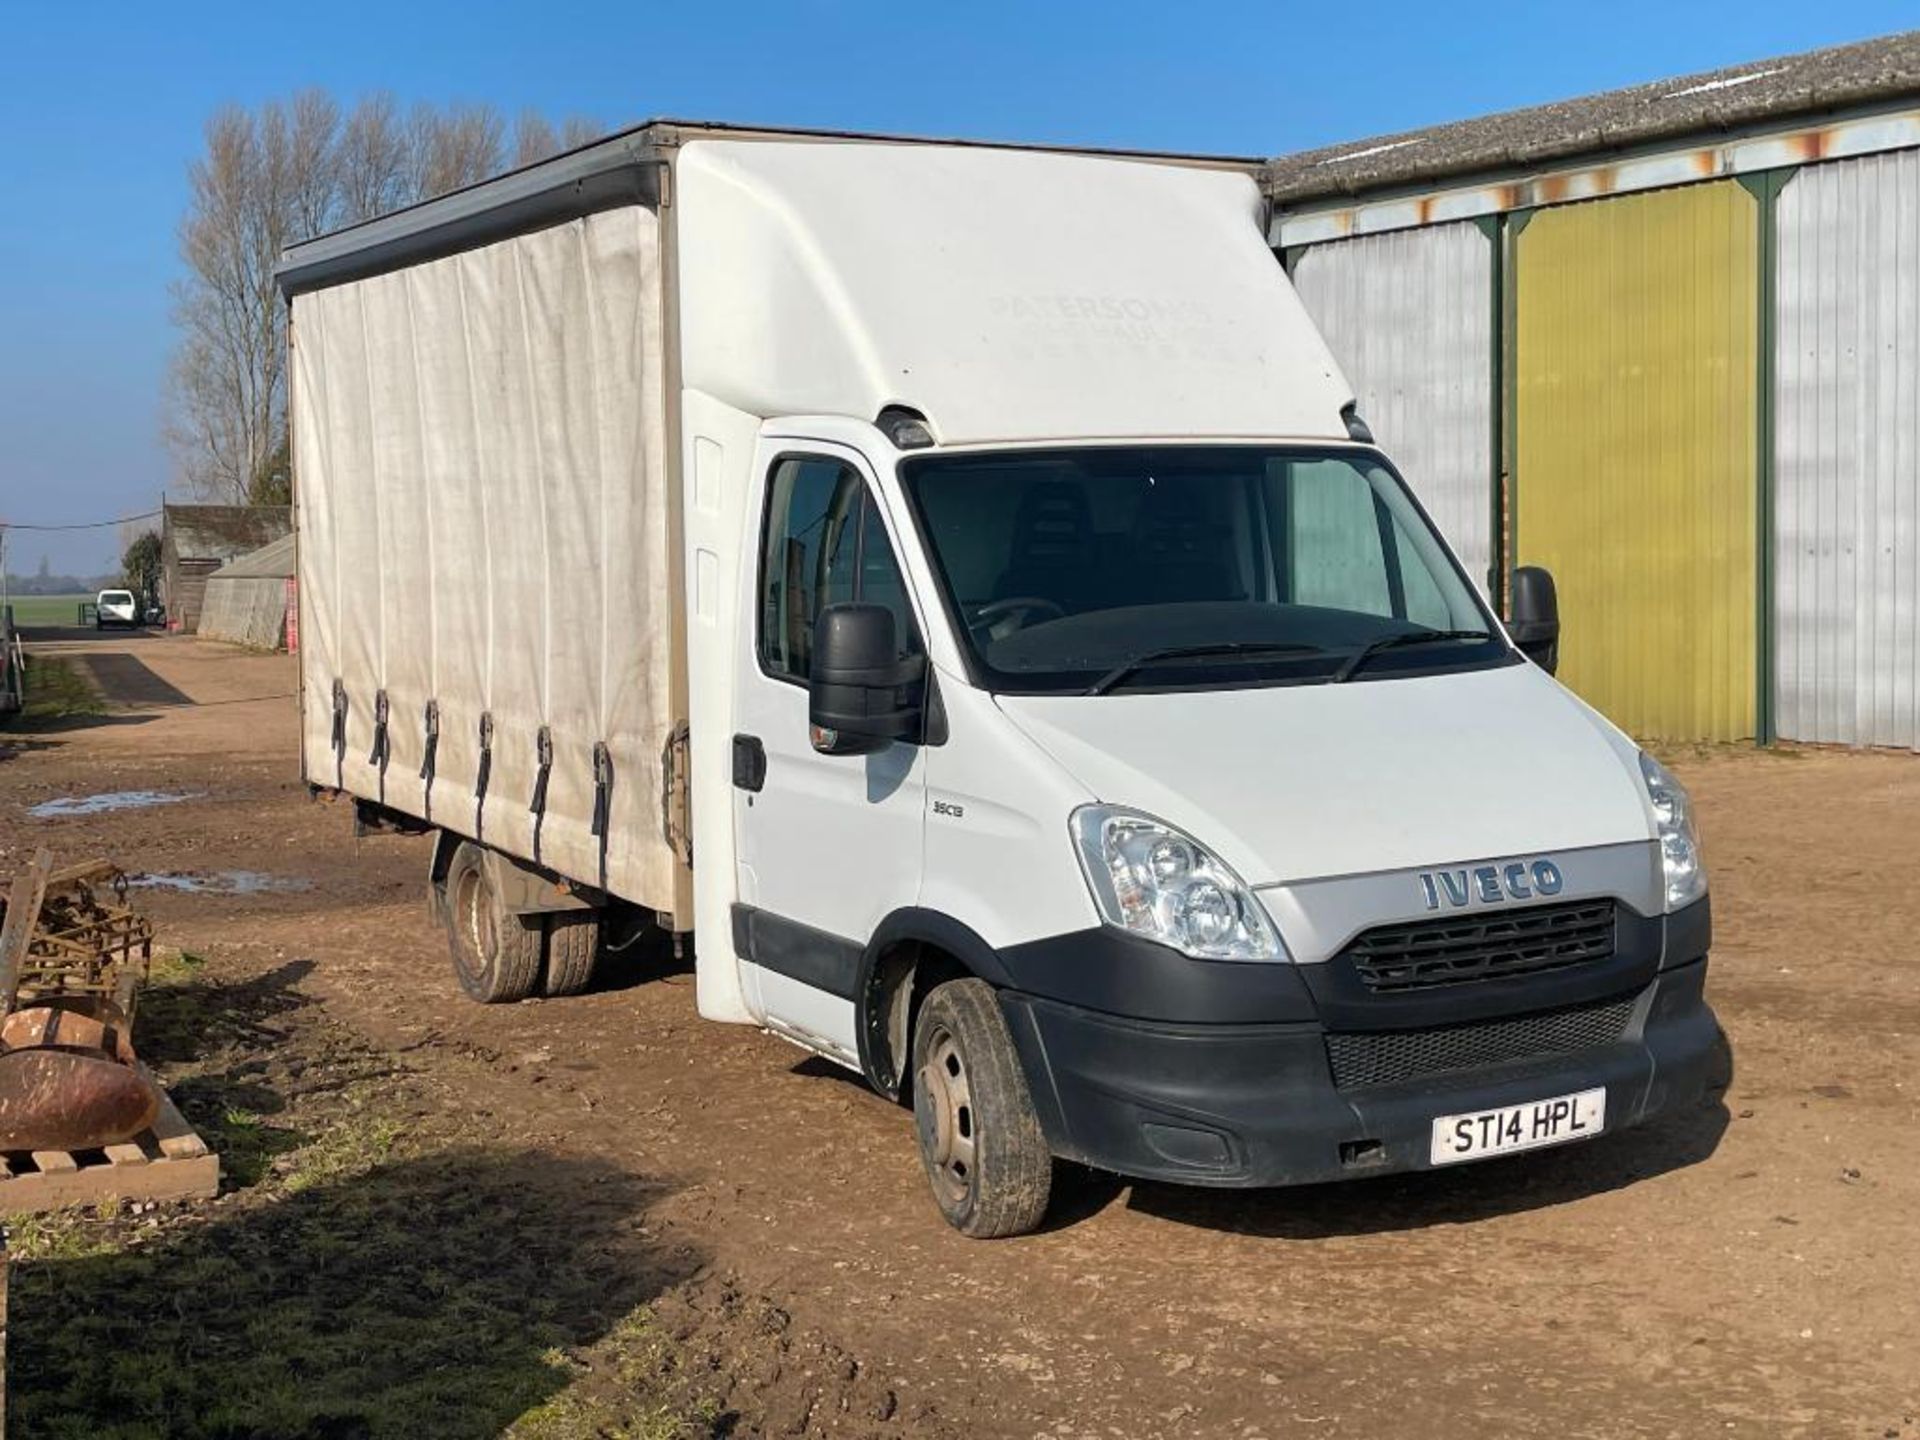 2014 Iveco 35C13 dual wheel 14' curtain side van with 3 seater cab, 6-speed manual. Reg No: ST14 HPL